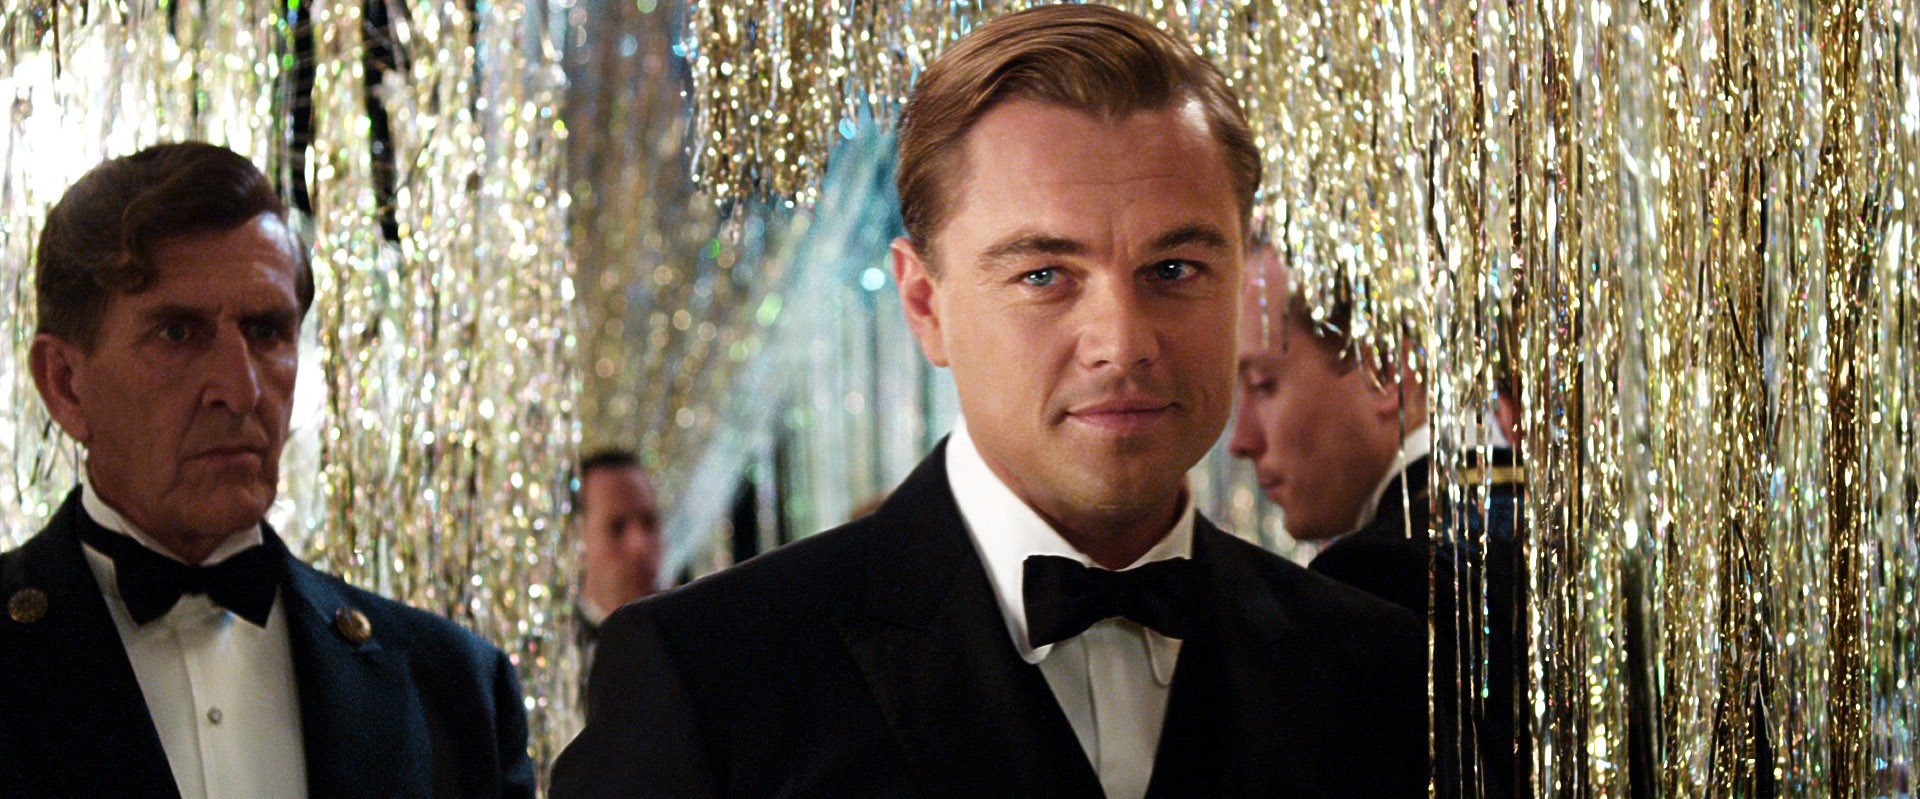 Leonardo Dicaprio As Jay Gatsby Wed Time Travel For These Hot Historical Heartthrobs 